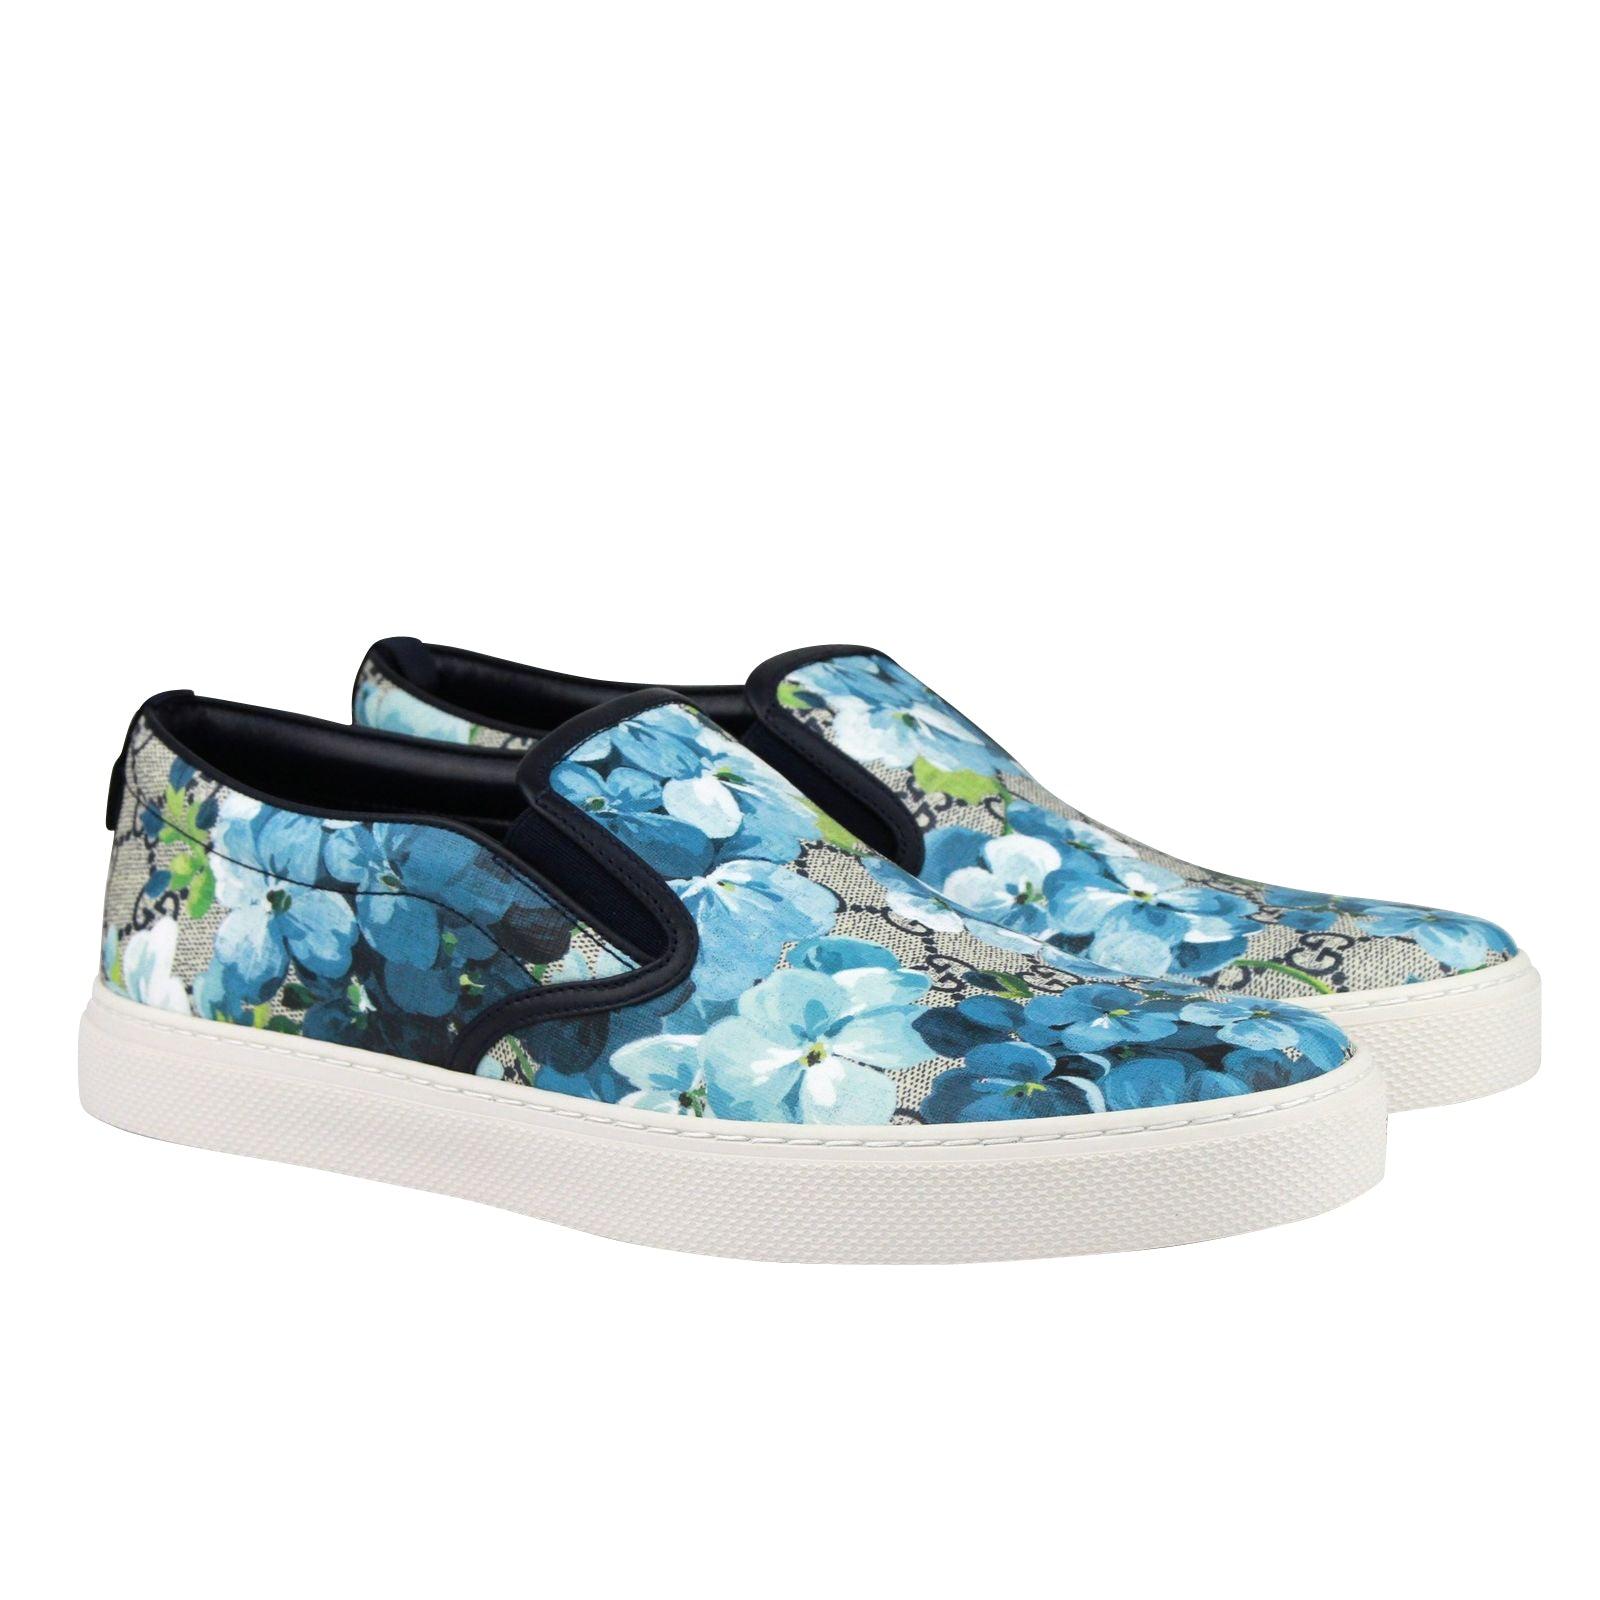 Gucci Bloom Flower Print gg Supreme Coated Canvas Slip Sneakers 407362 8471  in Blue for Men - Save 2% | Lyst